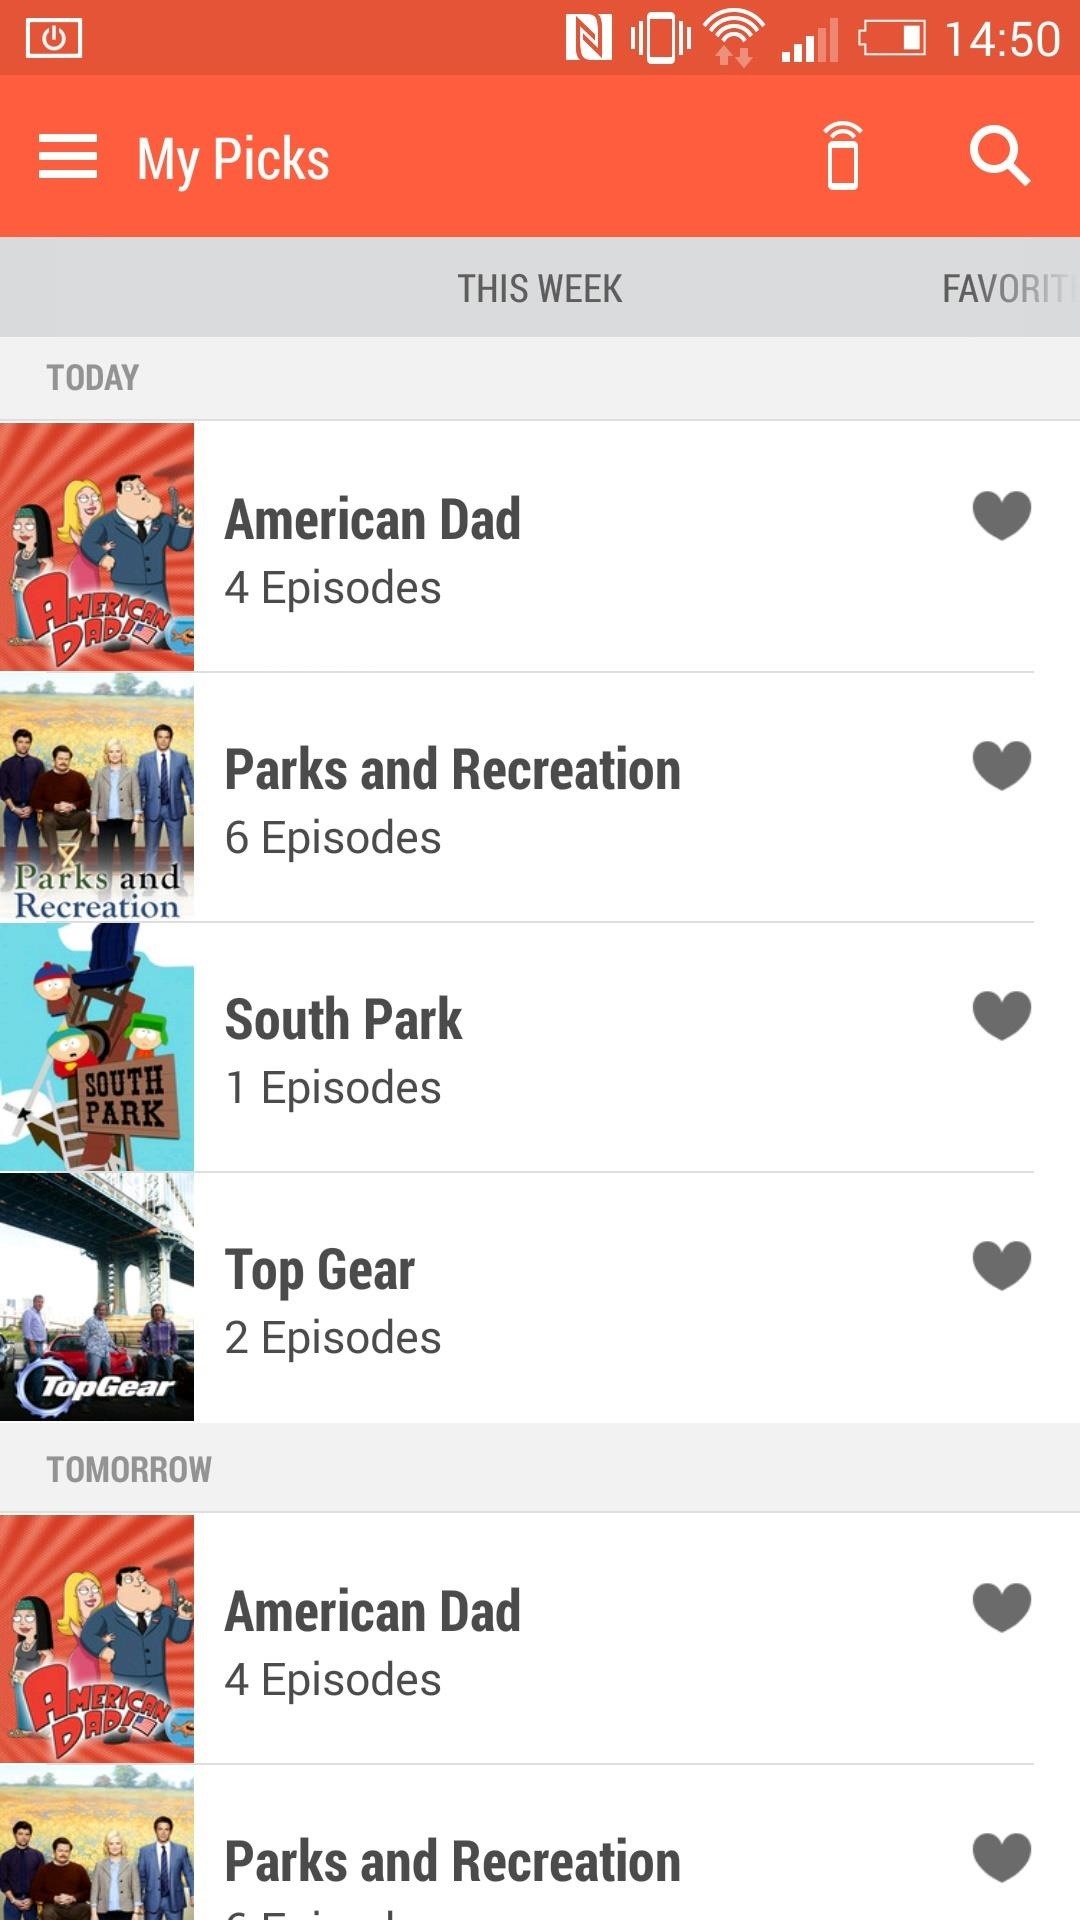 How to Use the M8's New Sense TV App on Your HTC One M7 & Ditch Your Remotes for Good